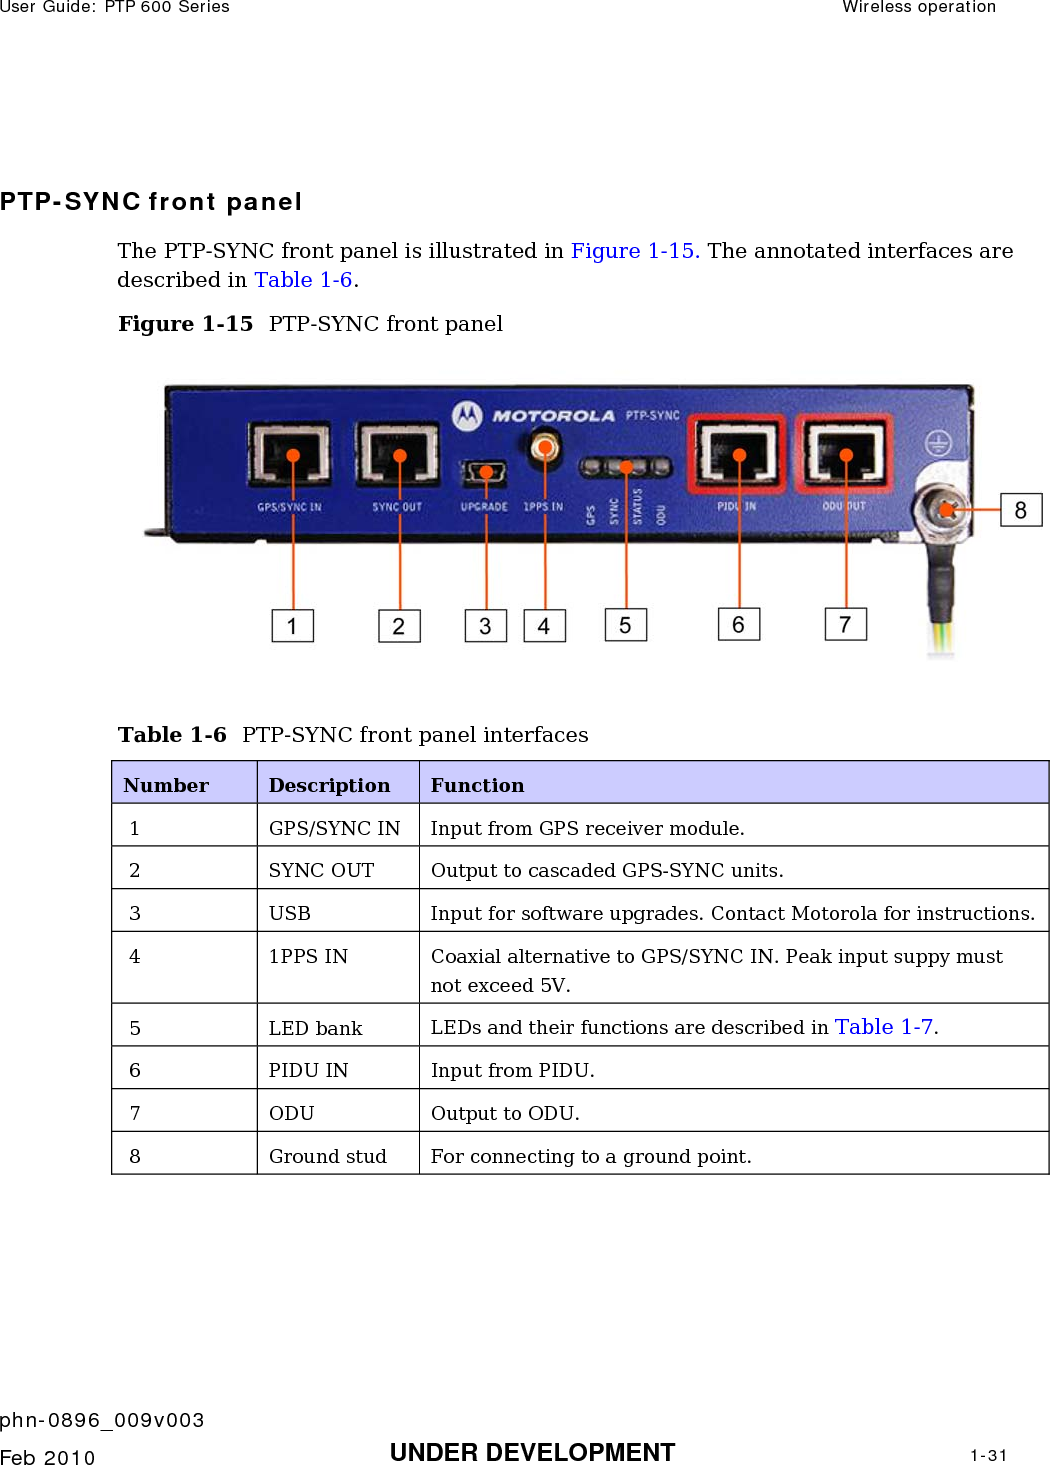 User Guide: PTP 600 Series  Wireless operation    phn-0896_009v003   Feb 2010  UNDER DEVELOPMENT  1-31   PTP-SYNC front panel The PTP-SYNC front panel is illustrated in Figure 1-15. The annotated interfaces are described in Table 1-6. Figure 1-15  PTP-SYNC front panel   Table 1-6  PTP-SYNC front panel interfaces Number  Description  Function 1  GPS/SYNC IN  Input from GPS receiver module. 2  SYNC OUT  Output to cascaded GPS-SYNC units. 3  USB  Input for software upgrades. Contact Motorola for instructions. 4  1PPS IN  Coaxial alternative to GPS/SYNC IN. Peak input suppy must not exceed 5V. 5 LED bank LEDs and their functions are described in Table 1-7. 6  PIDU IN  Input from PIDU. 7  ODU  Output to ODU. 8  Ground stud  For connecting to a ground point.  